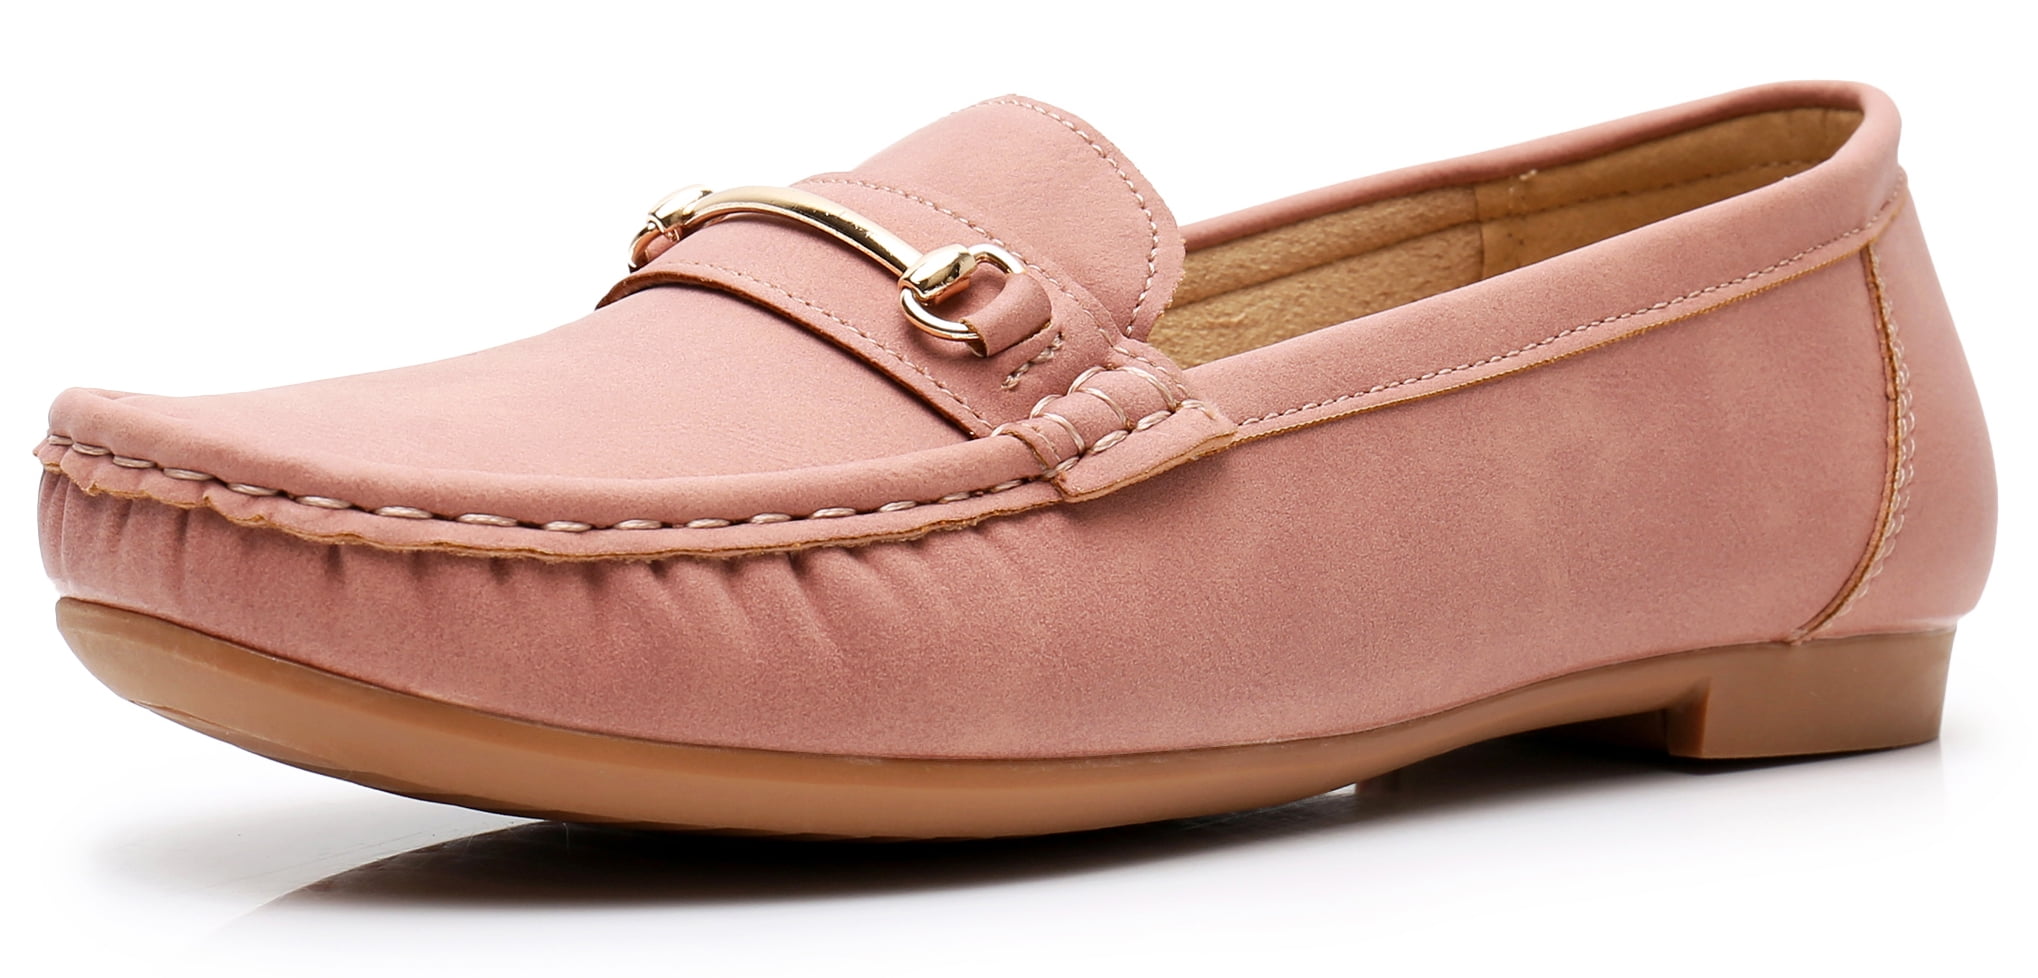 Womens Ladies Girls Moccasins Flat Loafers Comfort Boat Shoes Size 3 4 5 6 7 8 